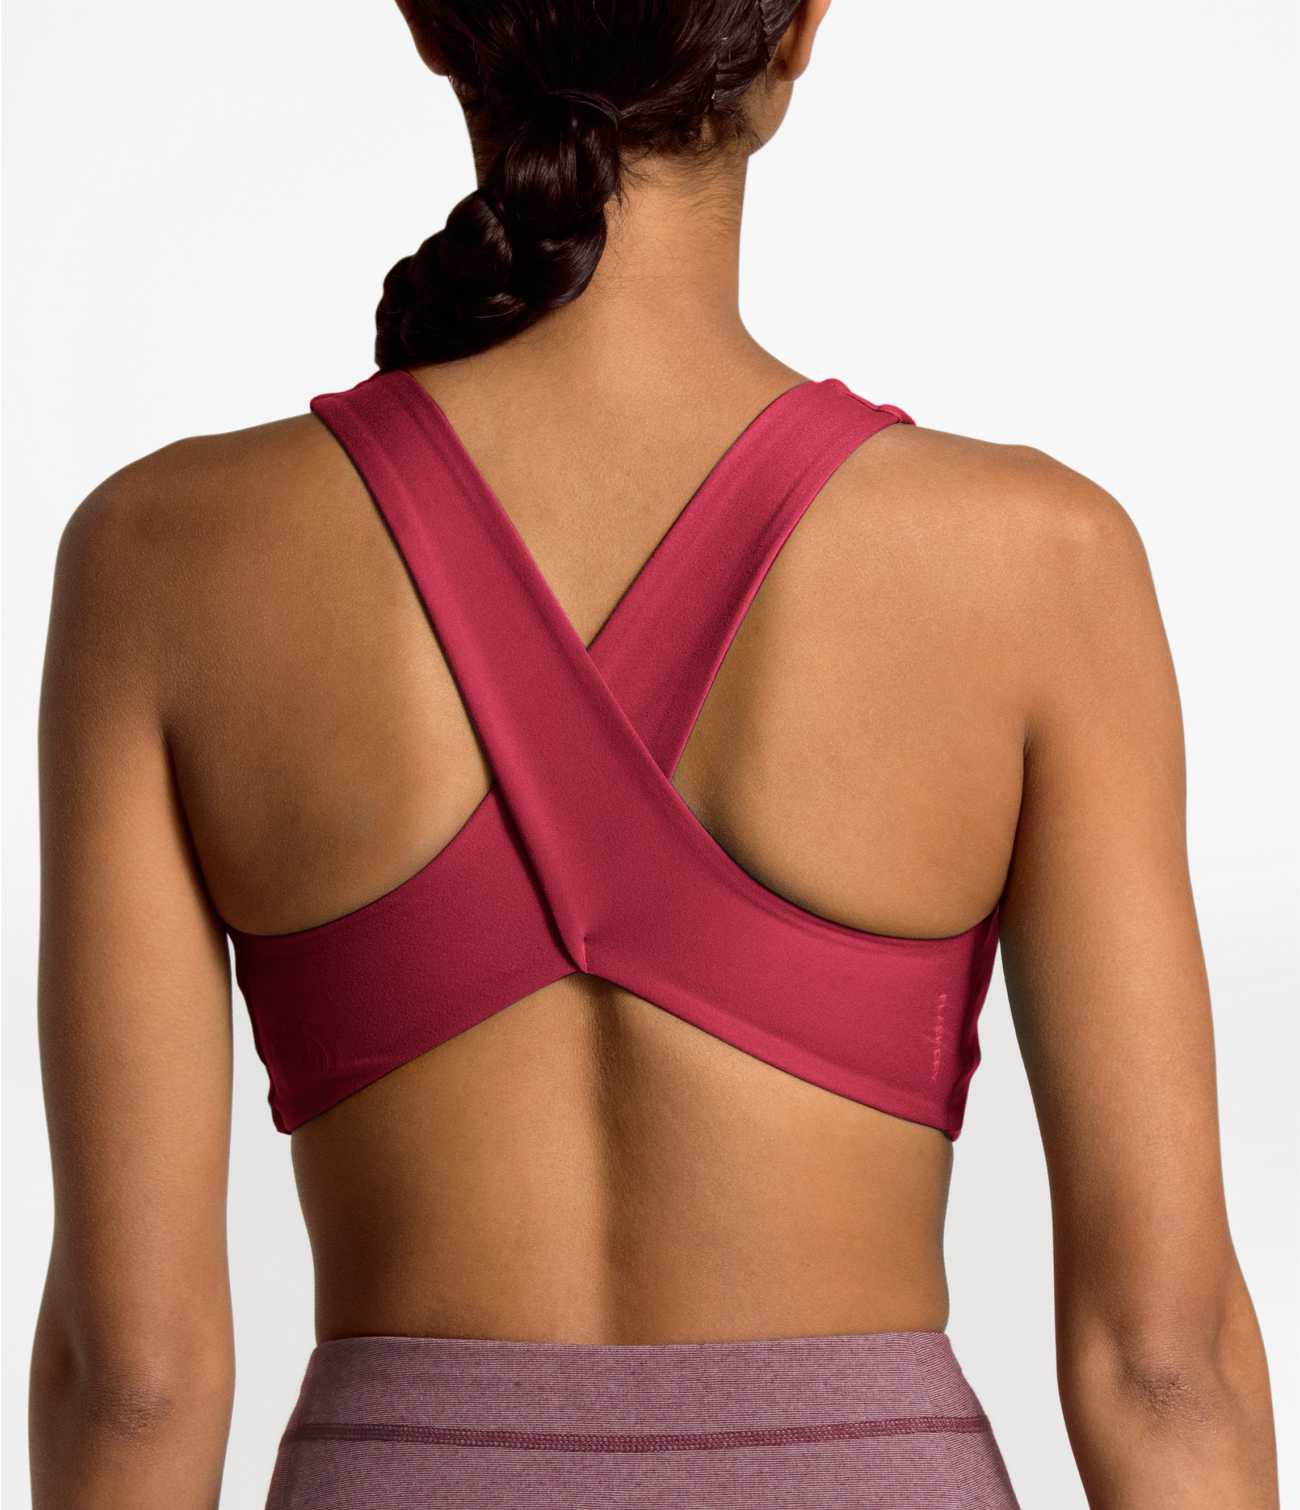 The North Face Beyond the Wall Free Motion Bra - Women's